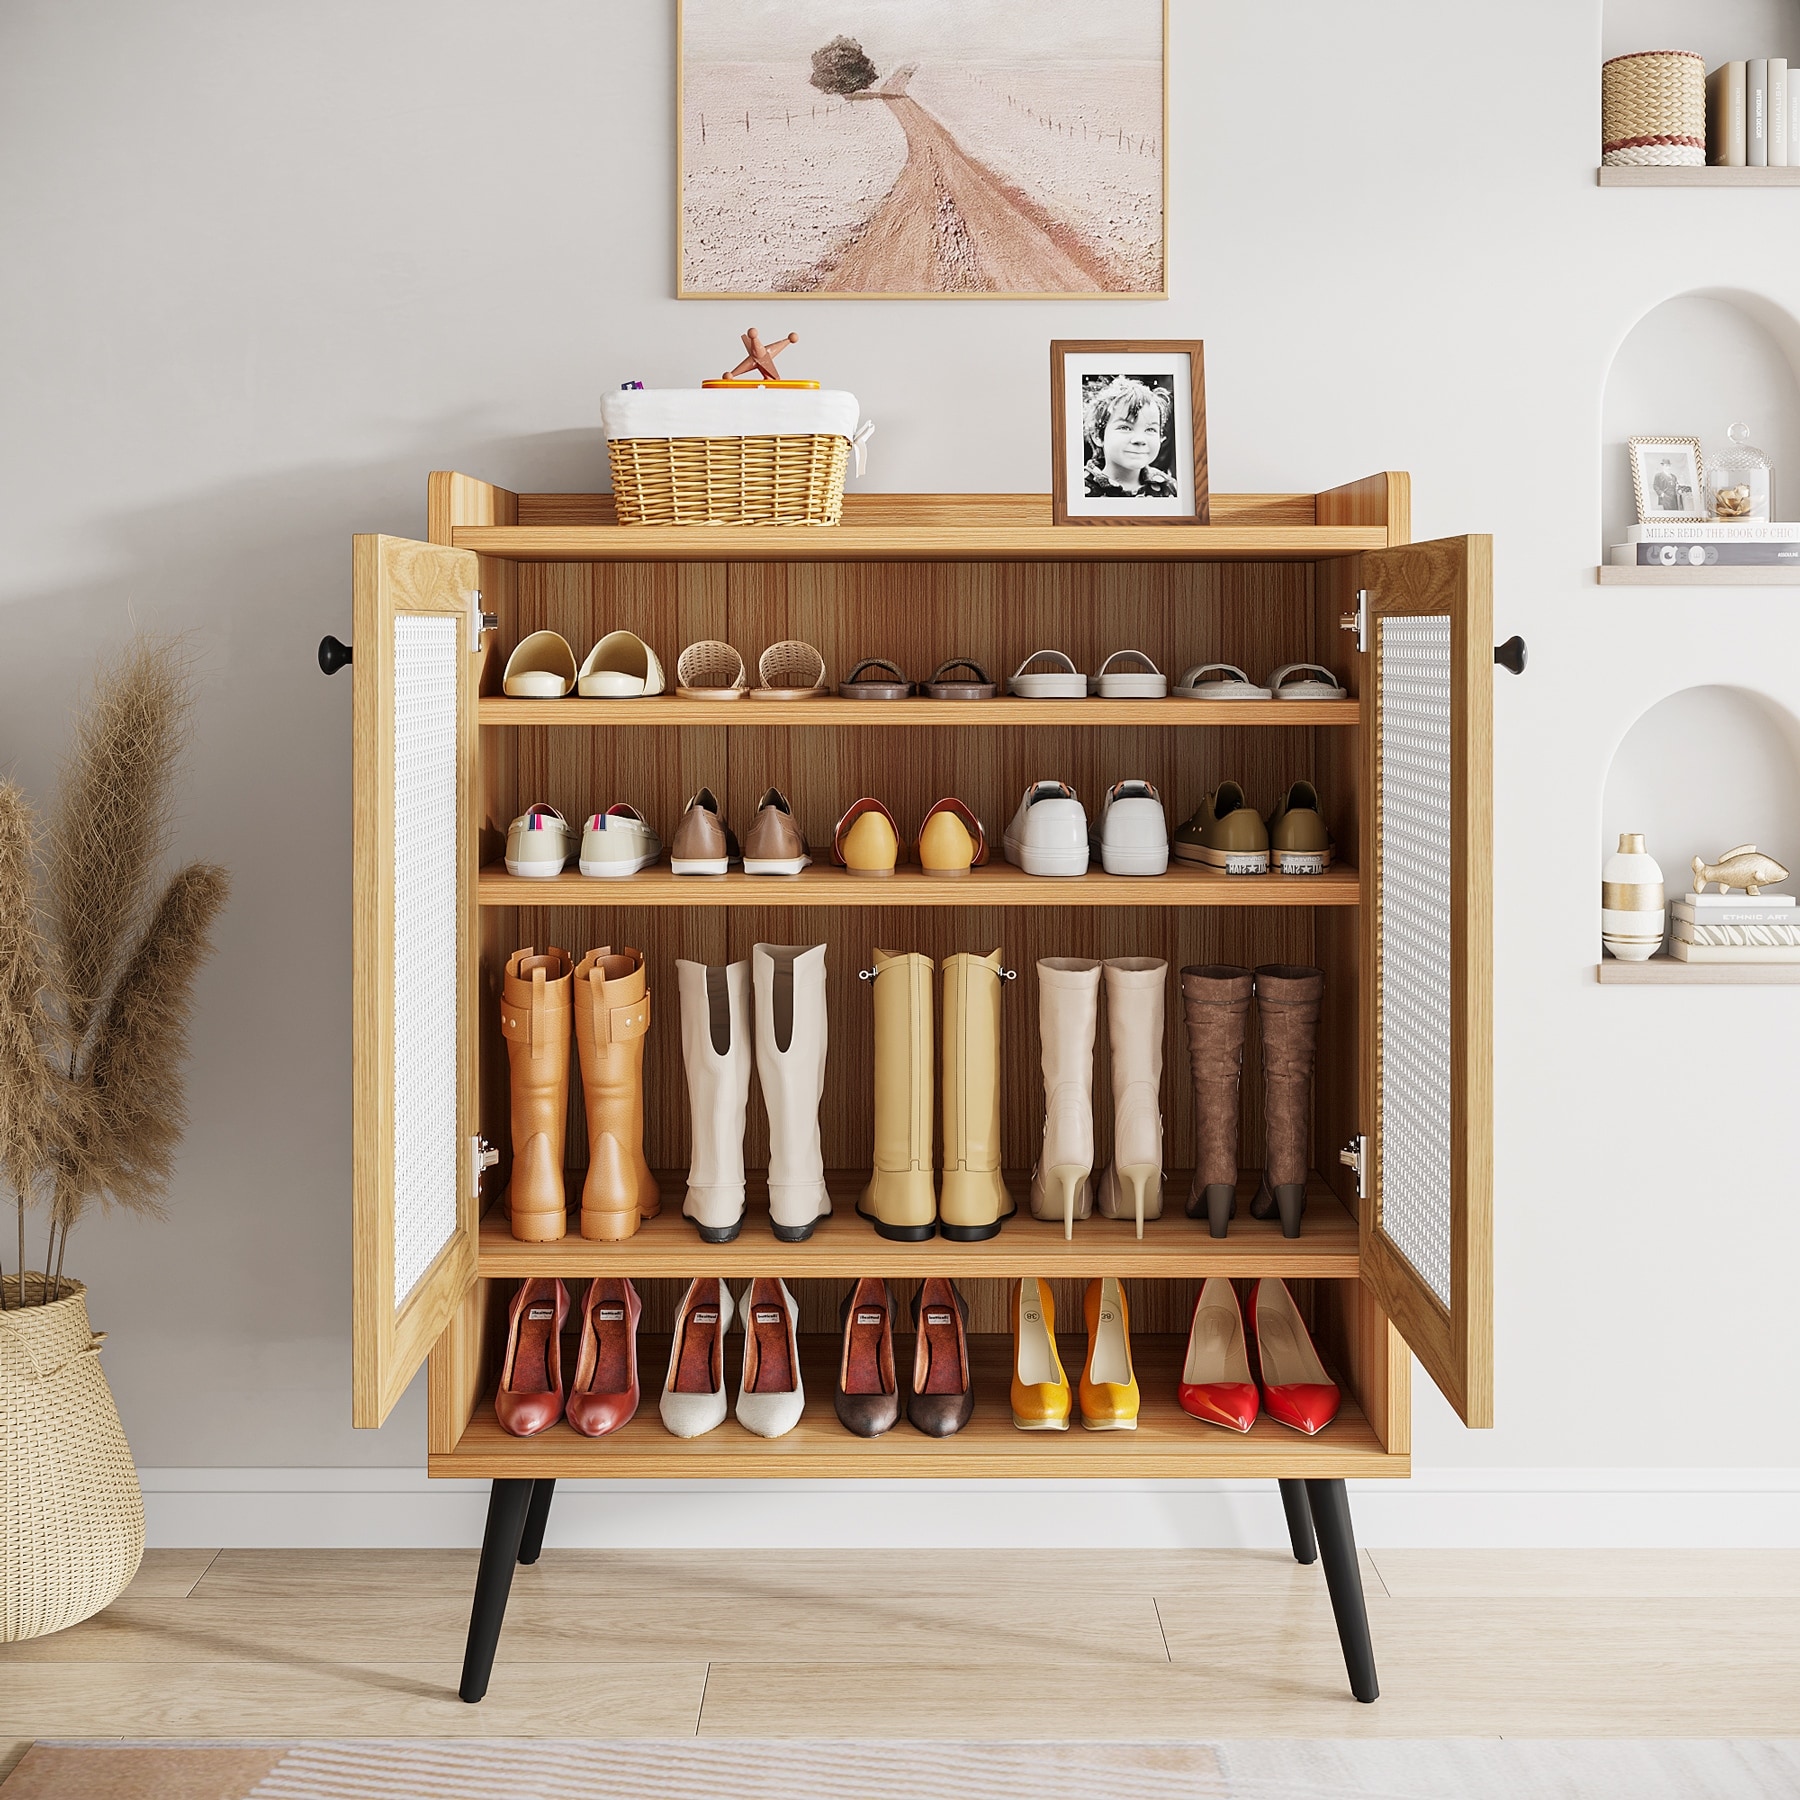 https://ak1.ostkcdn.com/images/products/is/images/direct/abf31d339c47fc0d9cf91ecb00e64b11300ee75b/Shoe-Cabinet%2C-Rattan-Shoe-Rack-Organizer%2C-6-Tiers-24-30-Pairs-Heavy-Duty-Shoe-Storage-Cabinet-with-Doors-for-Entryway.jpg